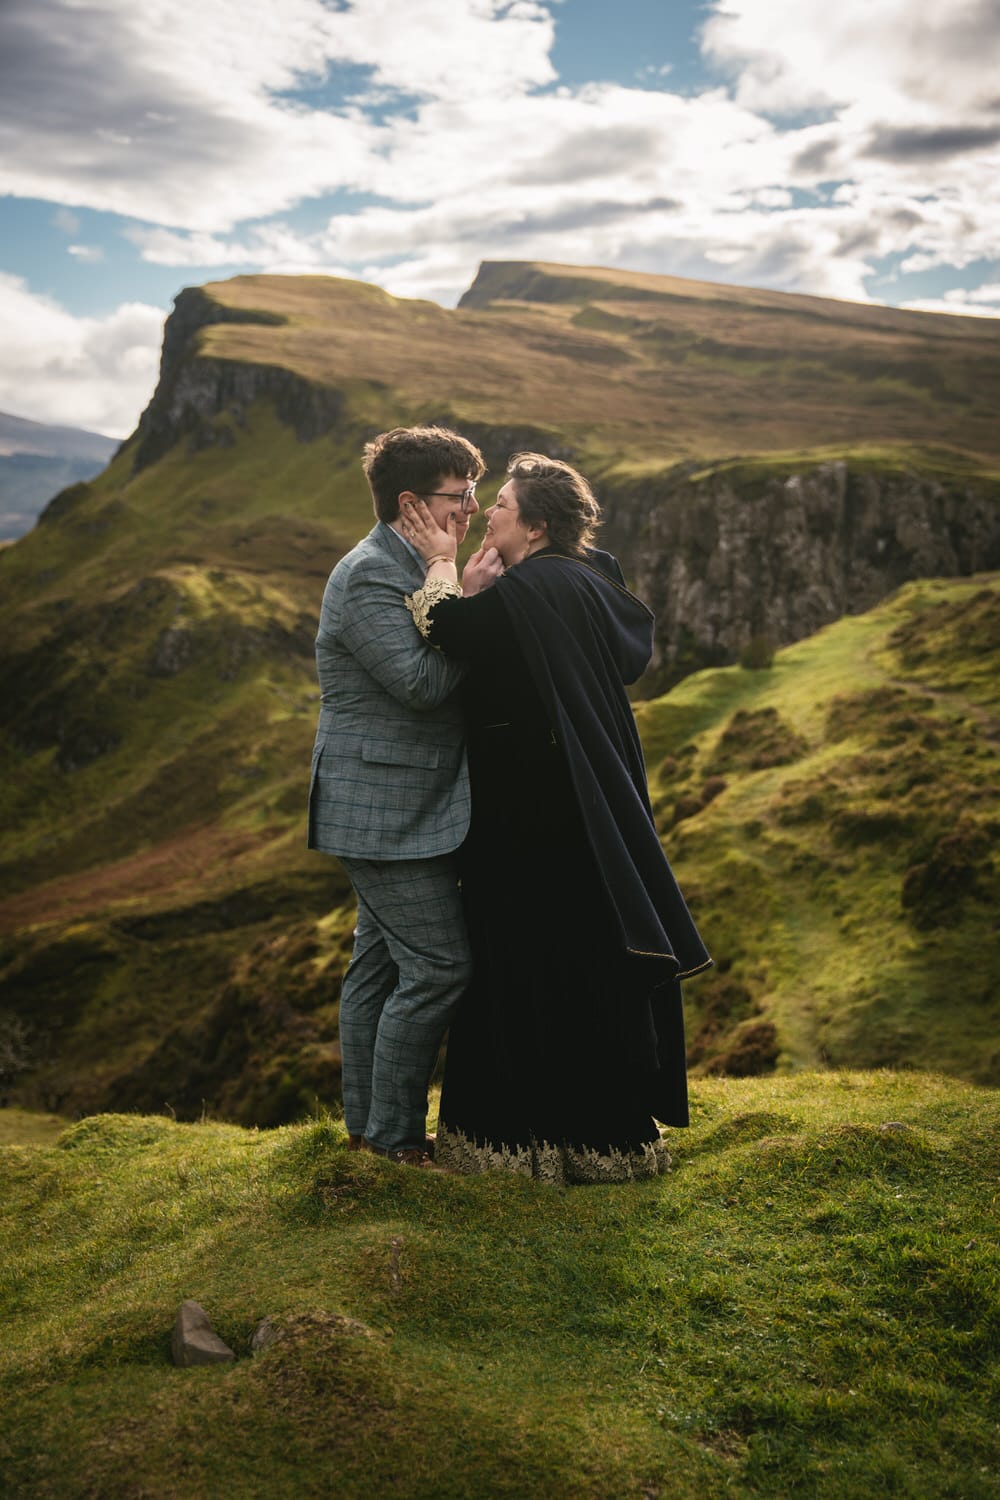 How to legally elope in Scotland